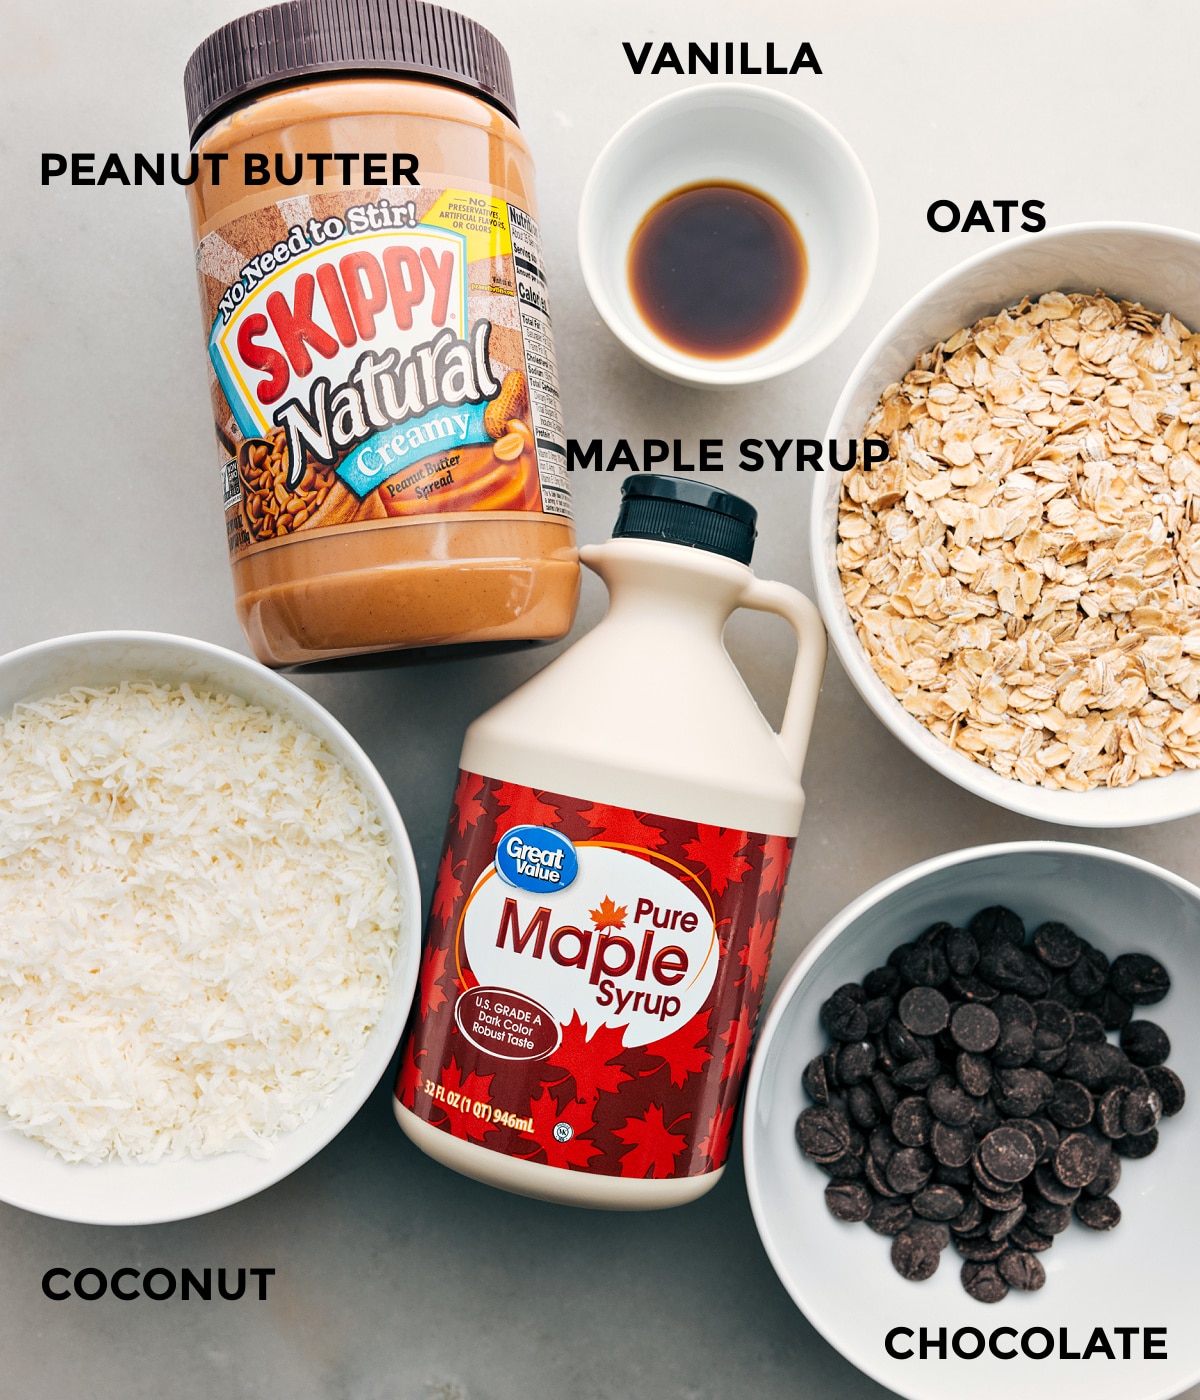 All the ingredients in this recipe, including peanut butter, vanilla, oats, maple syrup, coconut, and chocolate, are prepped for easy assembly.